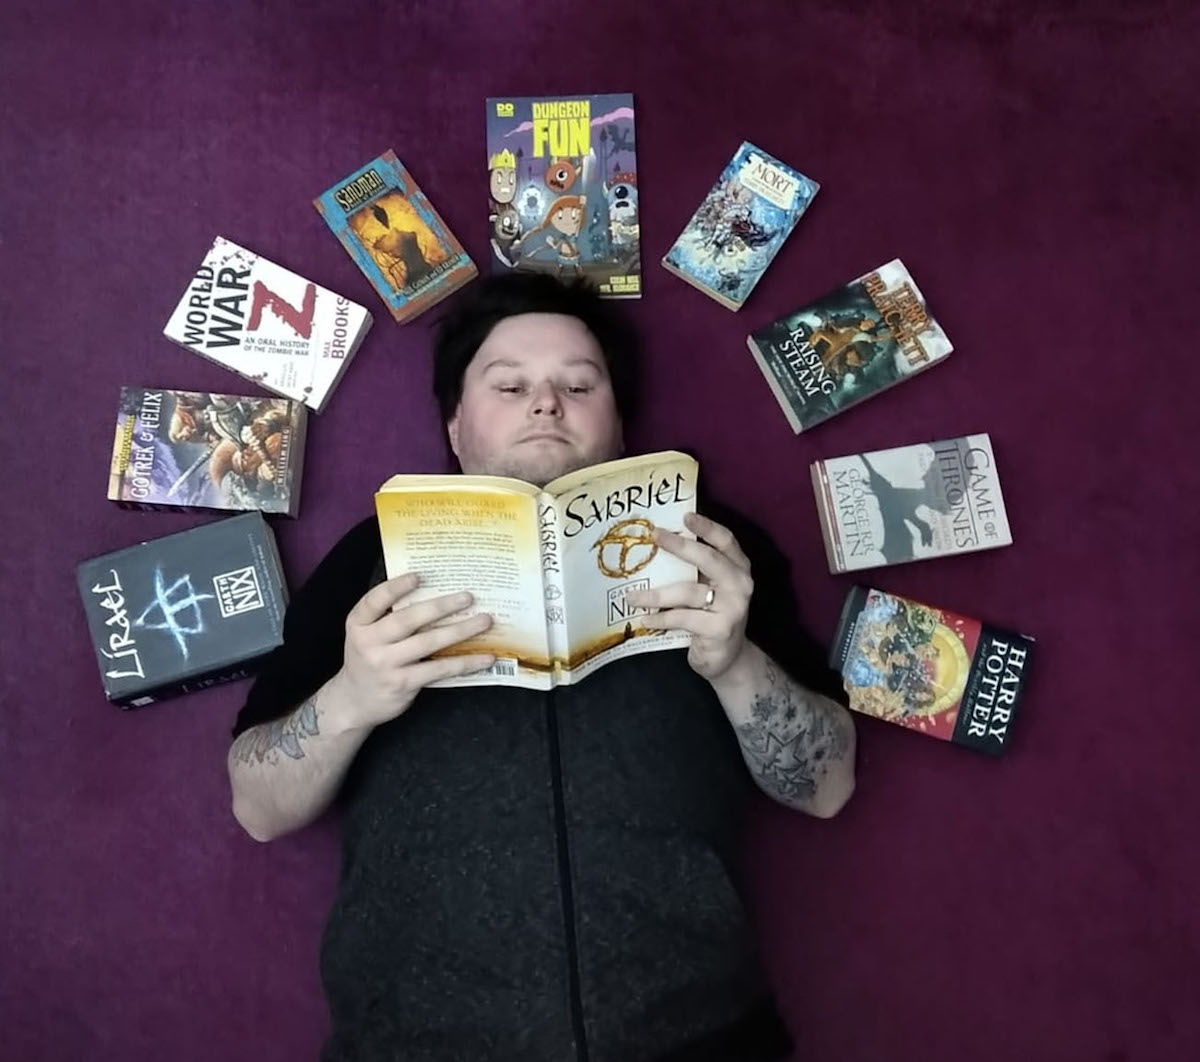 When we first saw this photo we thought he was hanging upside down!  The multi-talented Raymond from our team has made this beautiful book halo but has settled on the brilliant  #fantasy novel 'Sabriel' to read by  @garthnix  #ReadingHour  #WorldBookNight